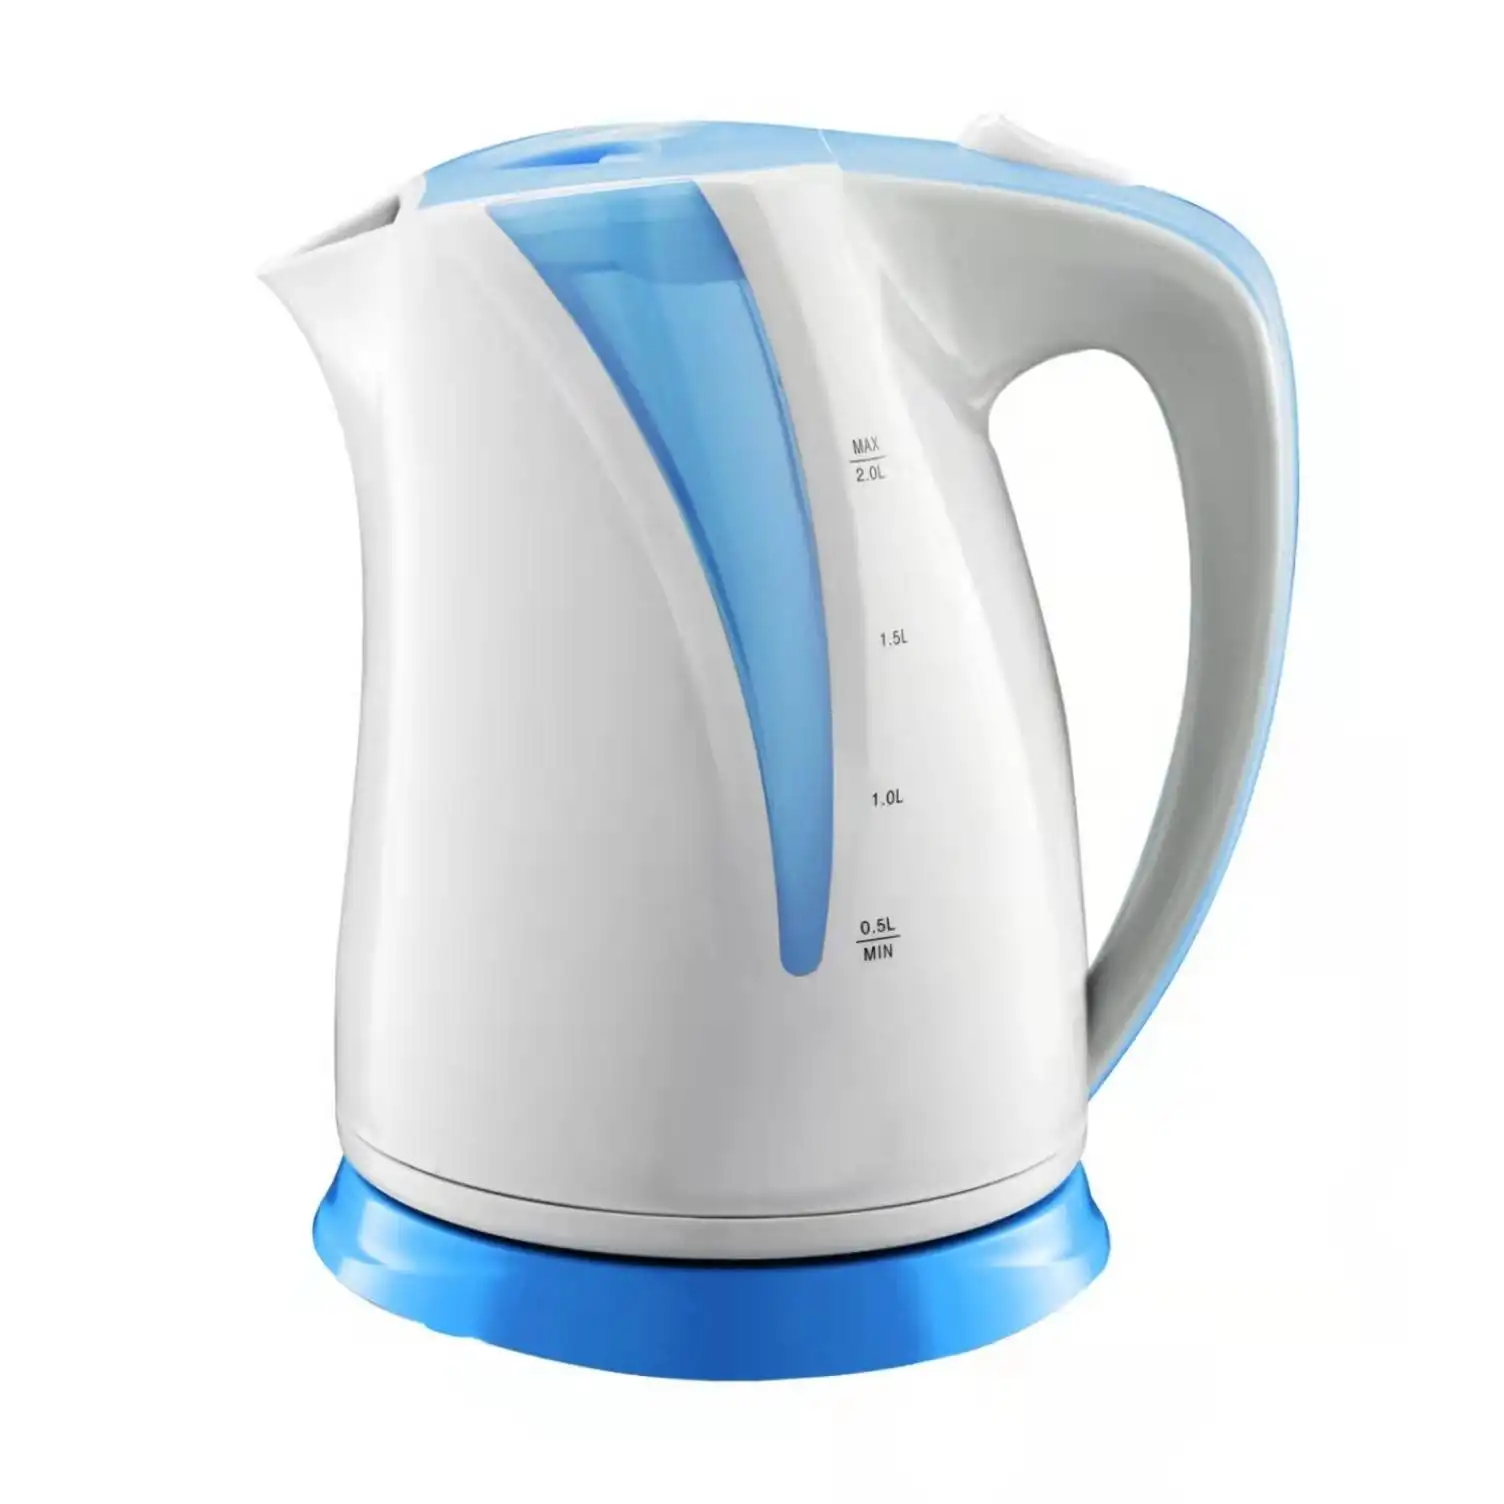 Small kitchen appliances plastic smart power-off, easy to clean and fast heating 2L capacity 220V electric kettle OEM